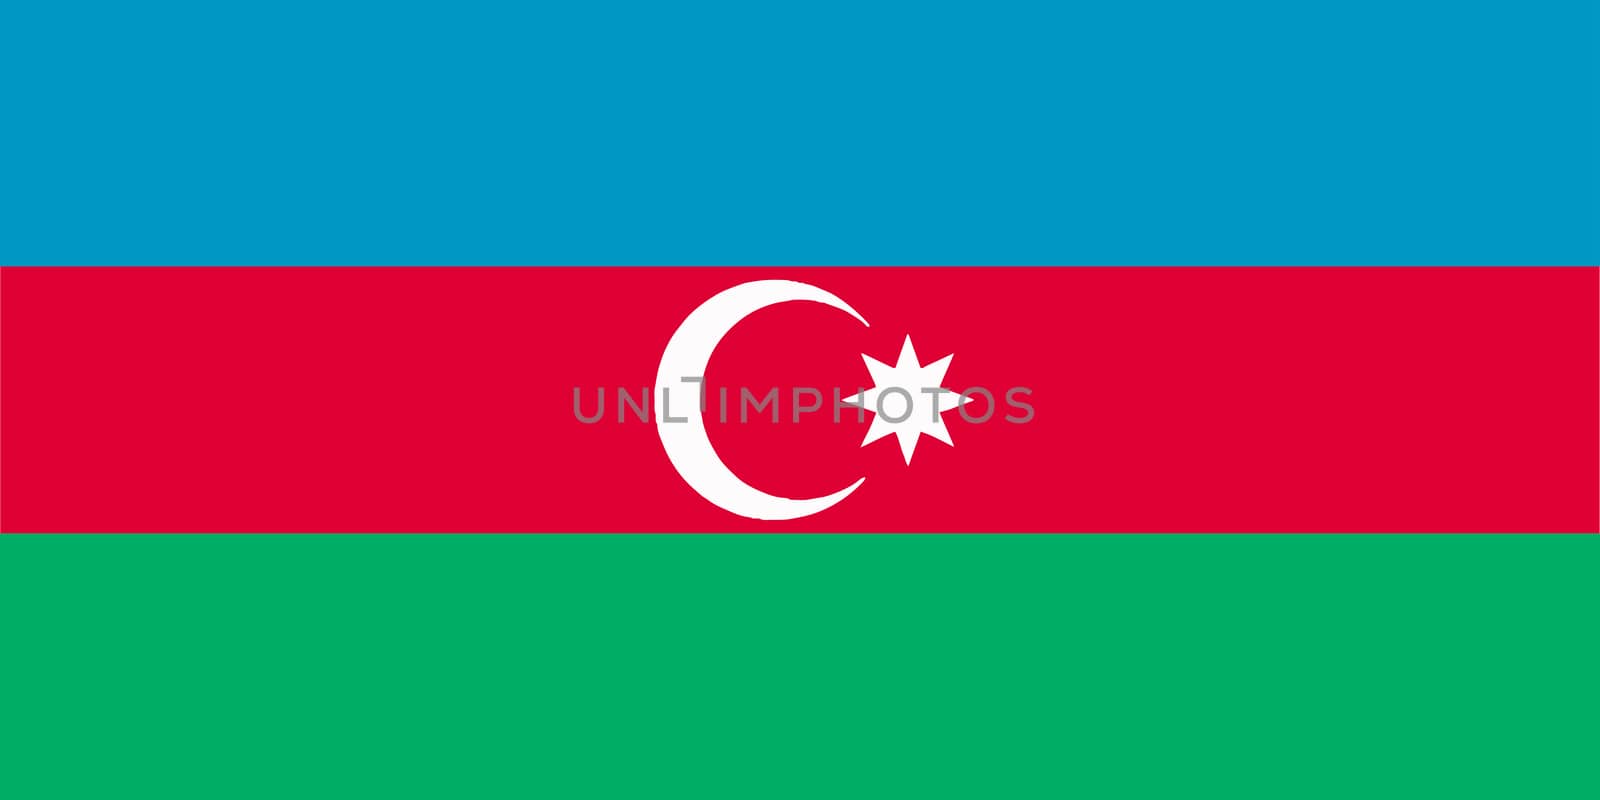 The flag of Azerbaijan in blue red and green